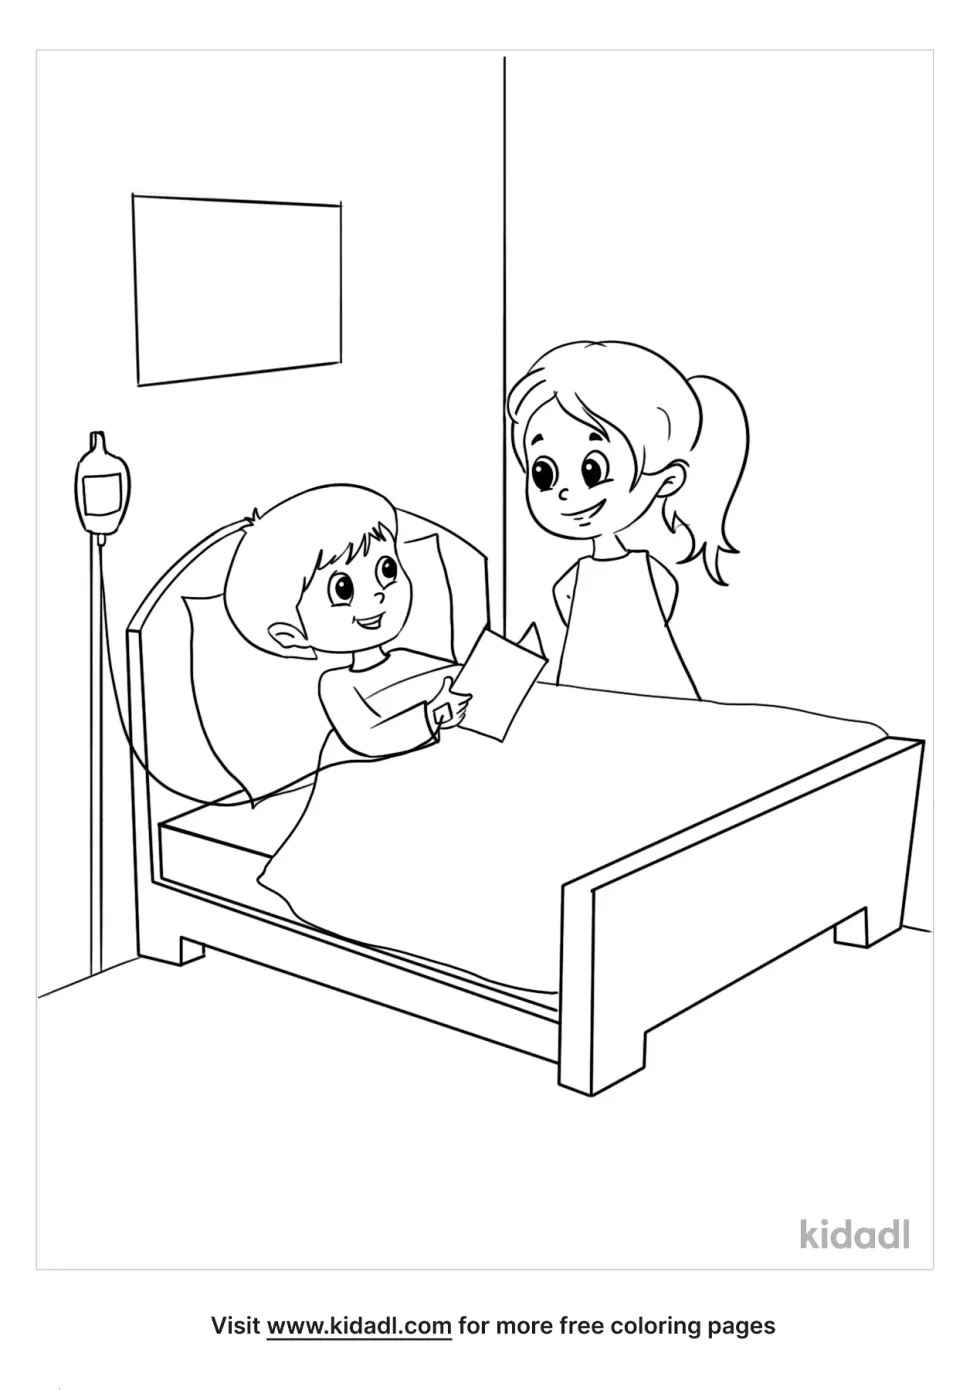 Child Visiting Sick Friend Coloring Page